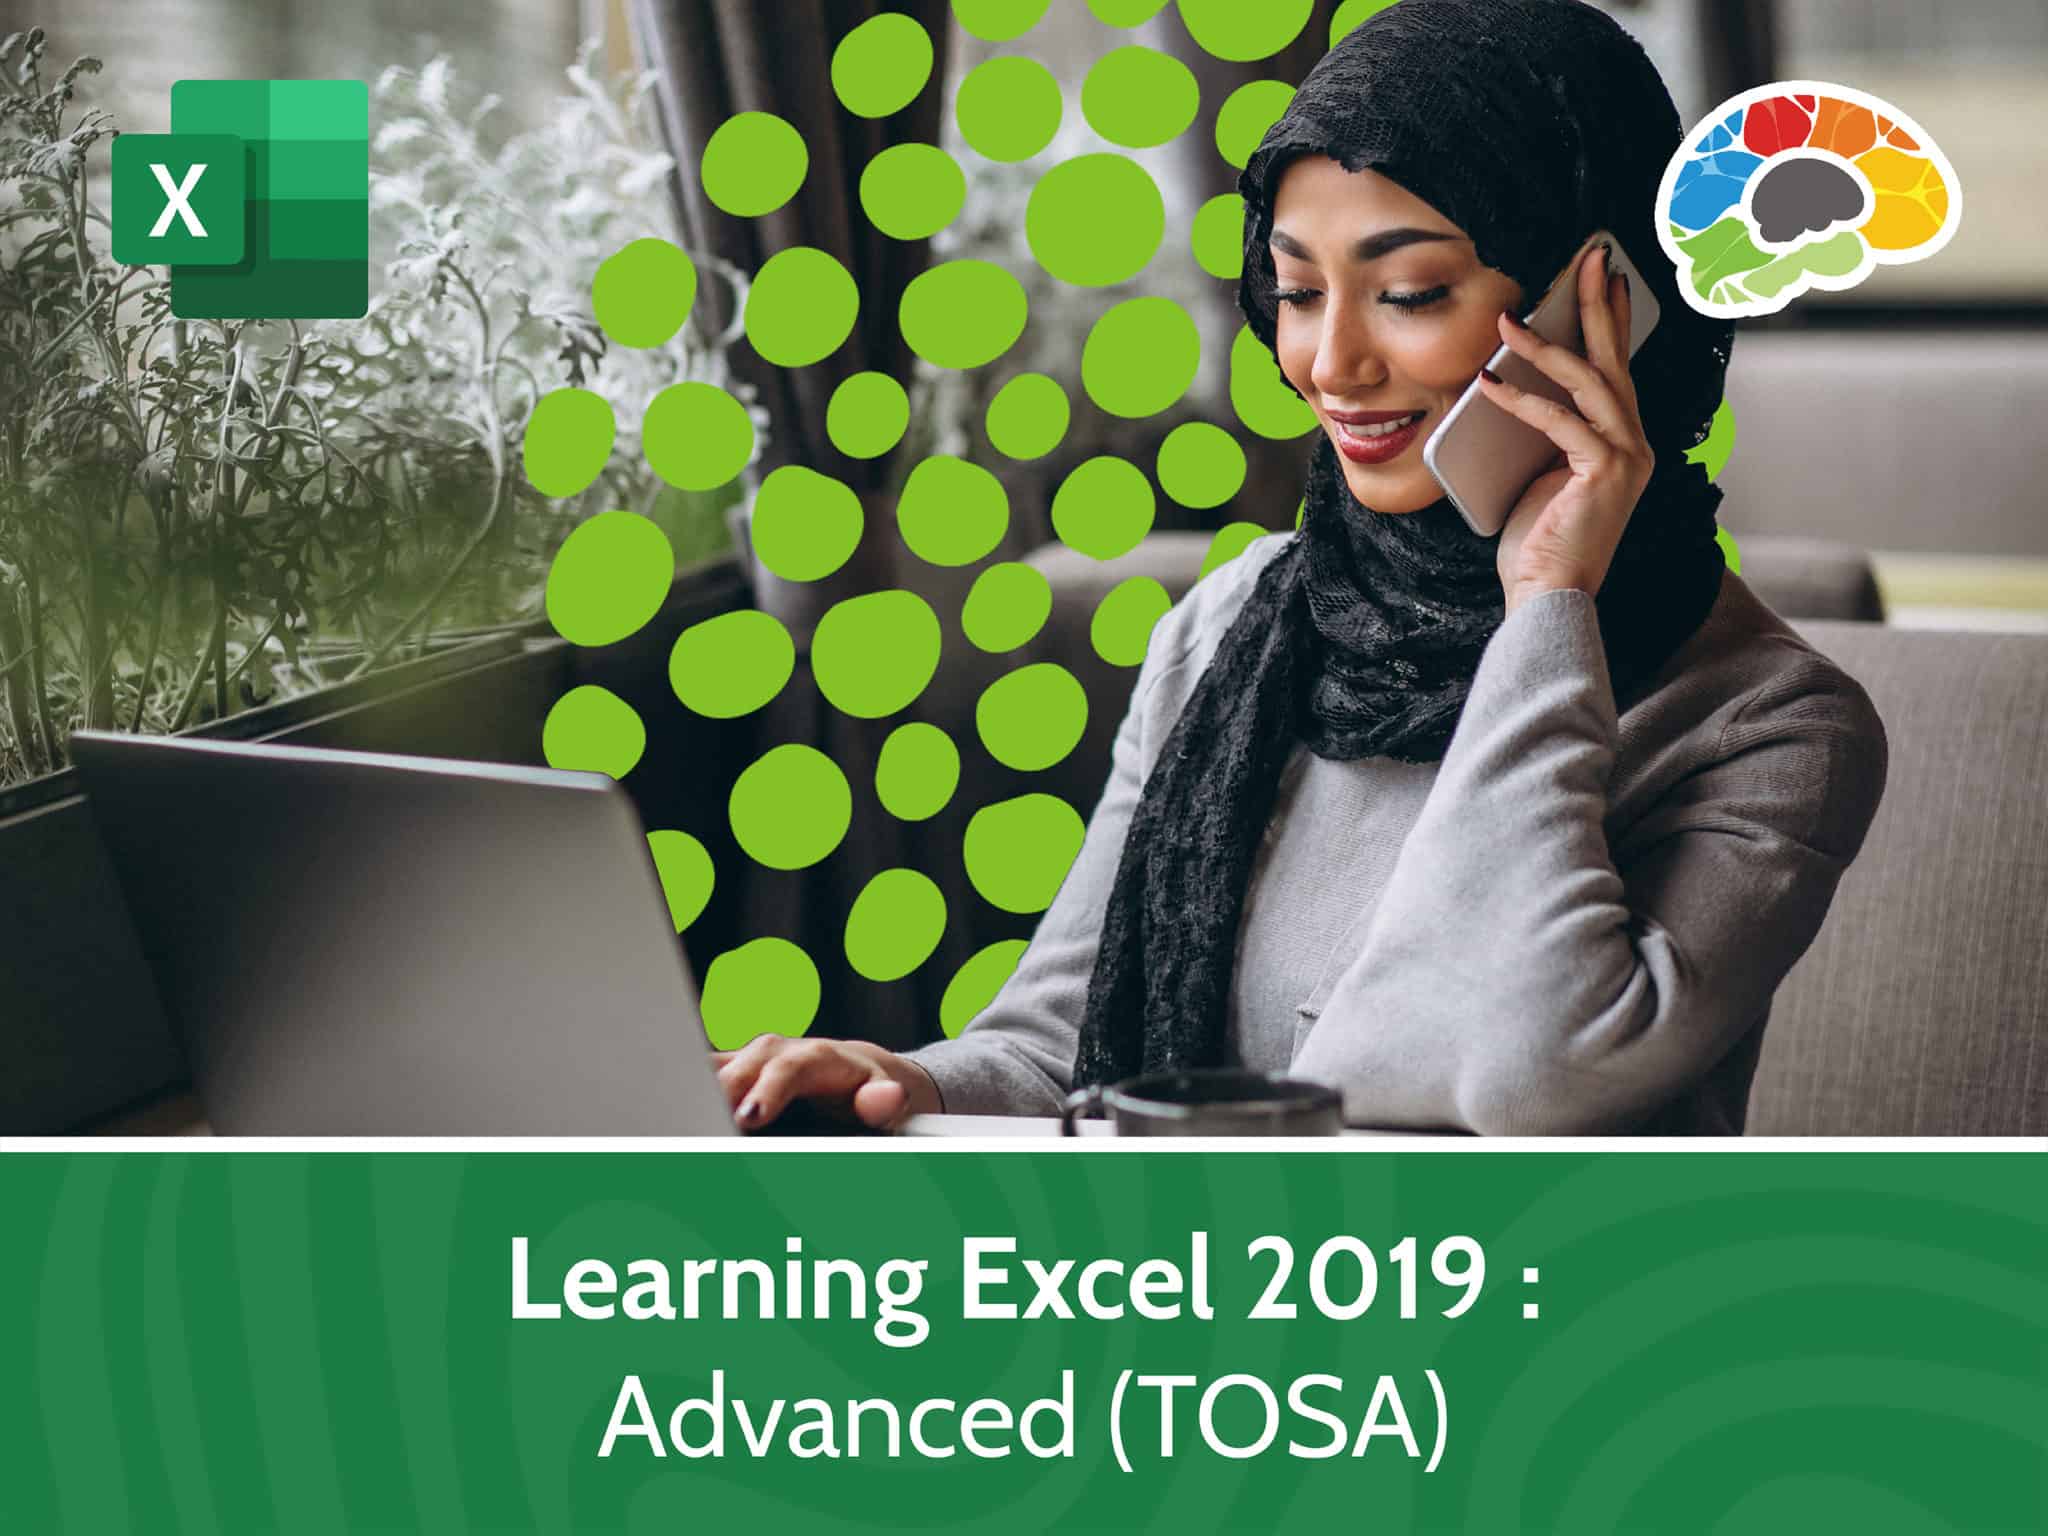 Learning Excel 2019 – Advanced TOSA scaled